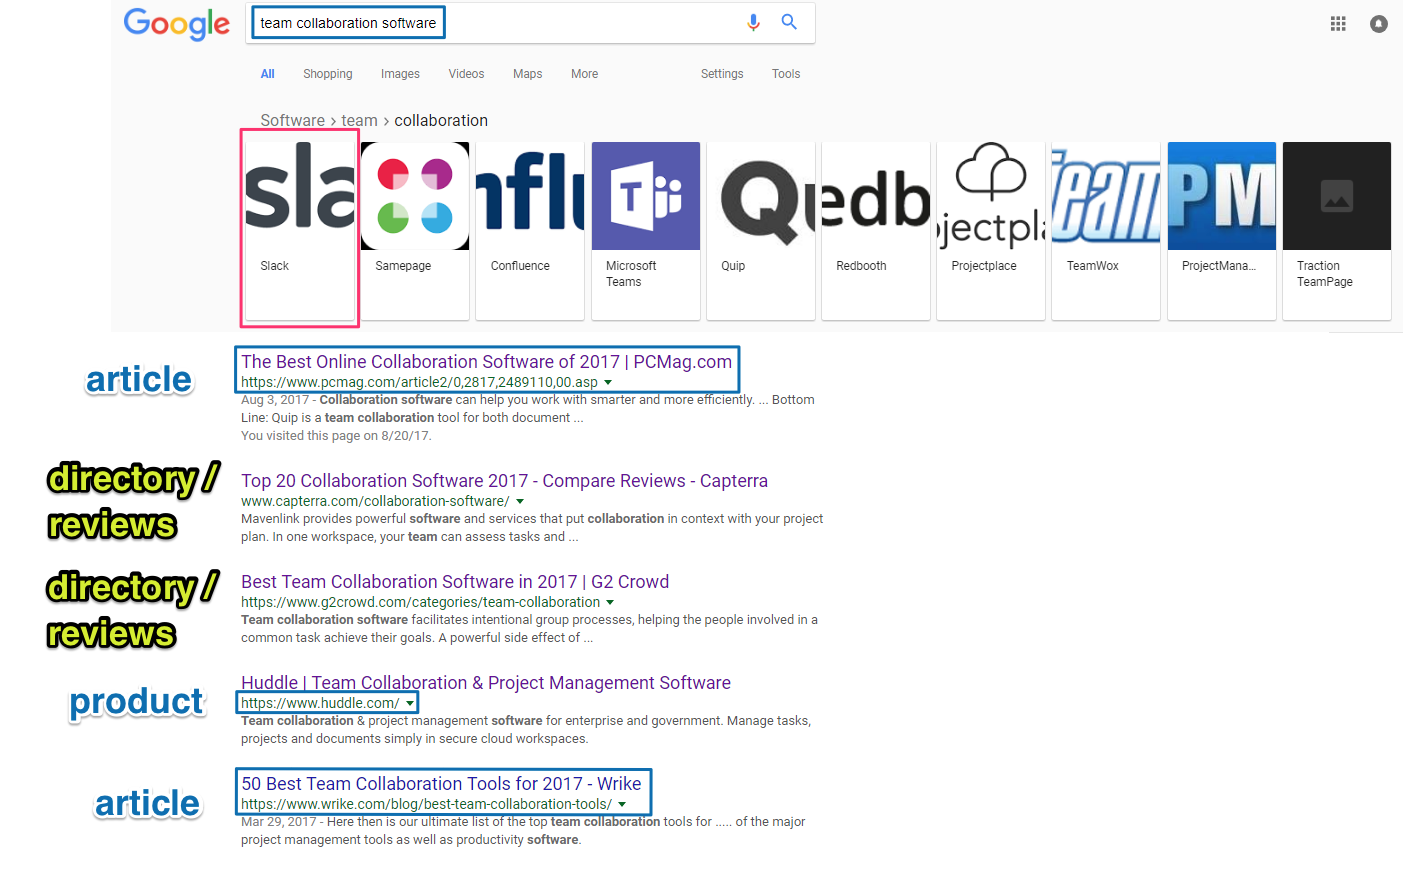 Screenshot showing google search results for "team collaboration software", as Slack also as a result